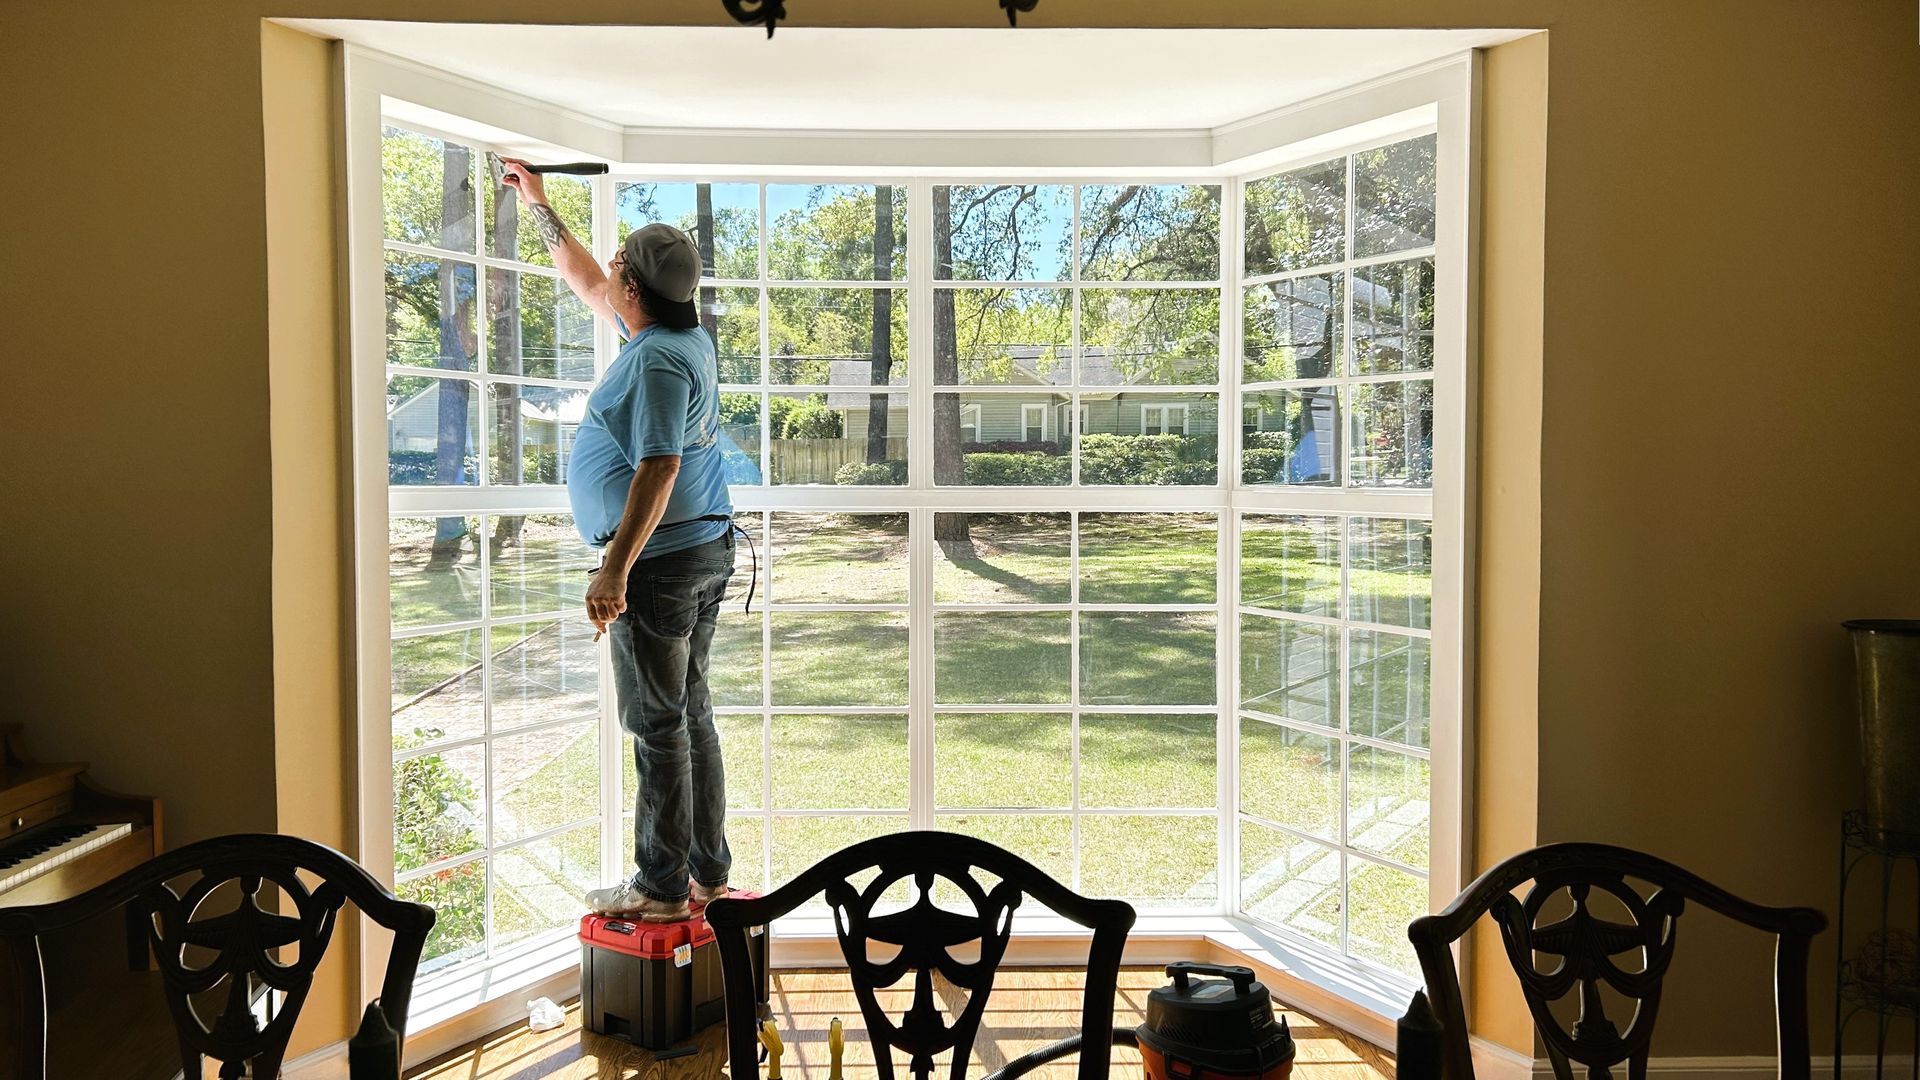 Bright Sunlight with harmful UV-Rays needed to be filtered out to keep the open window view. SPF residential tint was much more cost effective than shutters allowing the windows to maximize views without heat entering or UV-Sun fading inside the home.